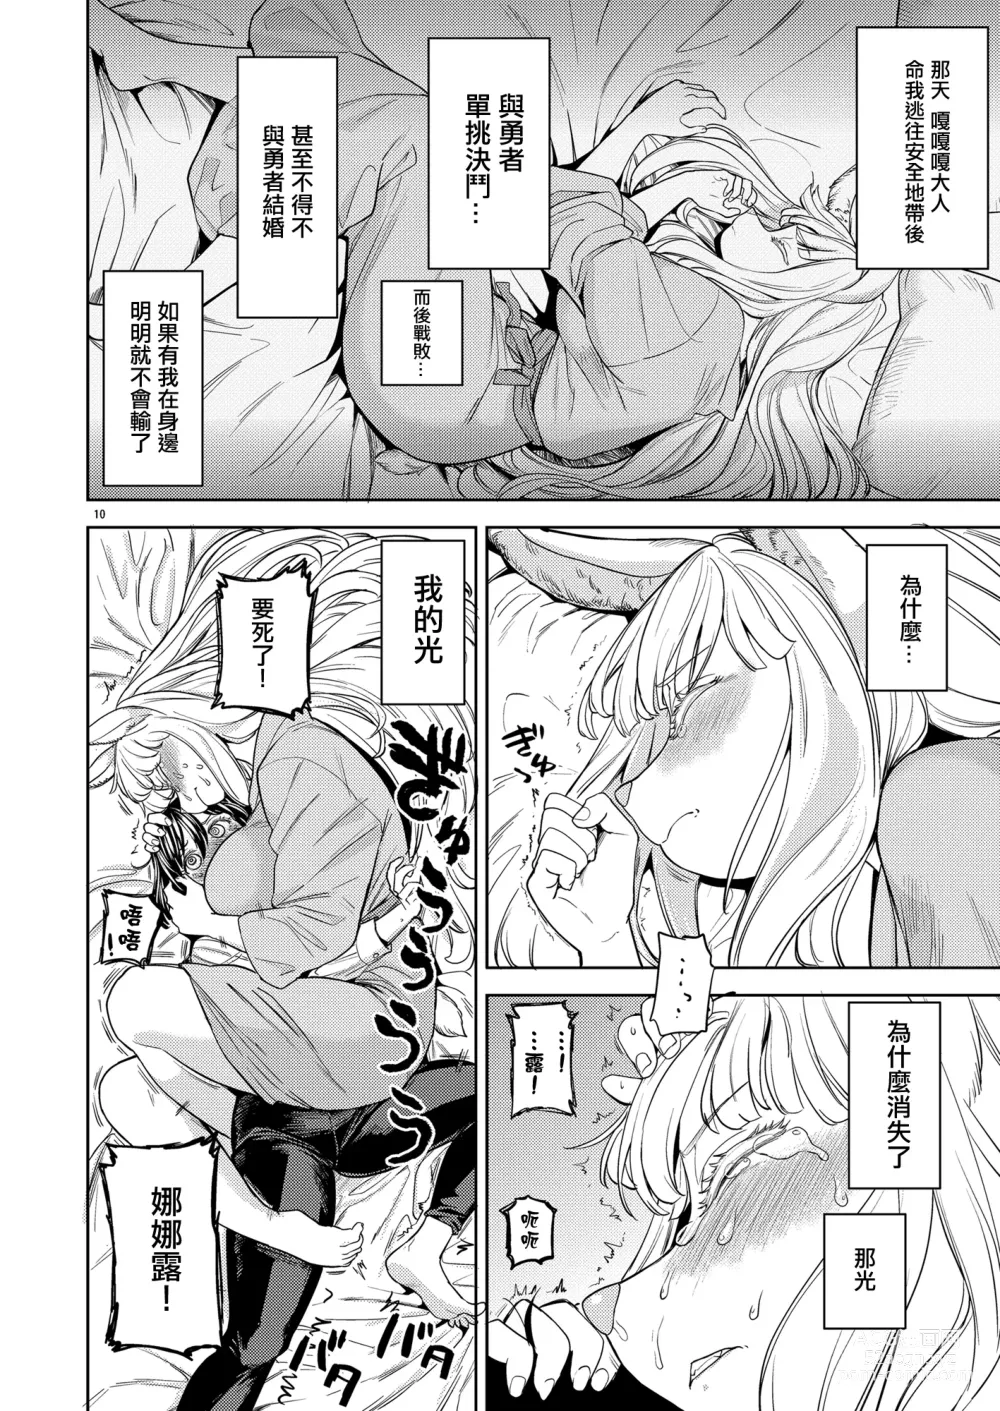 Page 14 of doujinshi 來一場蜜月旅行